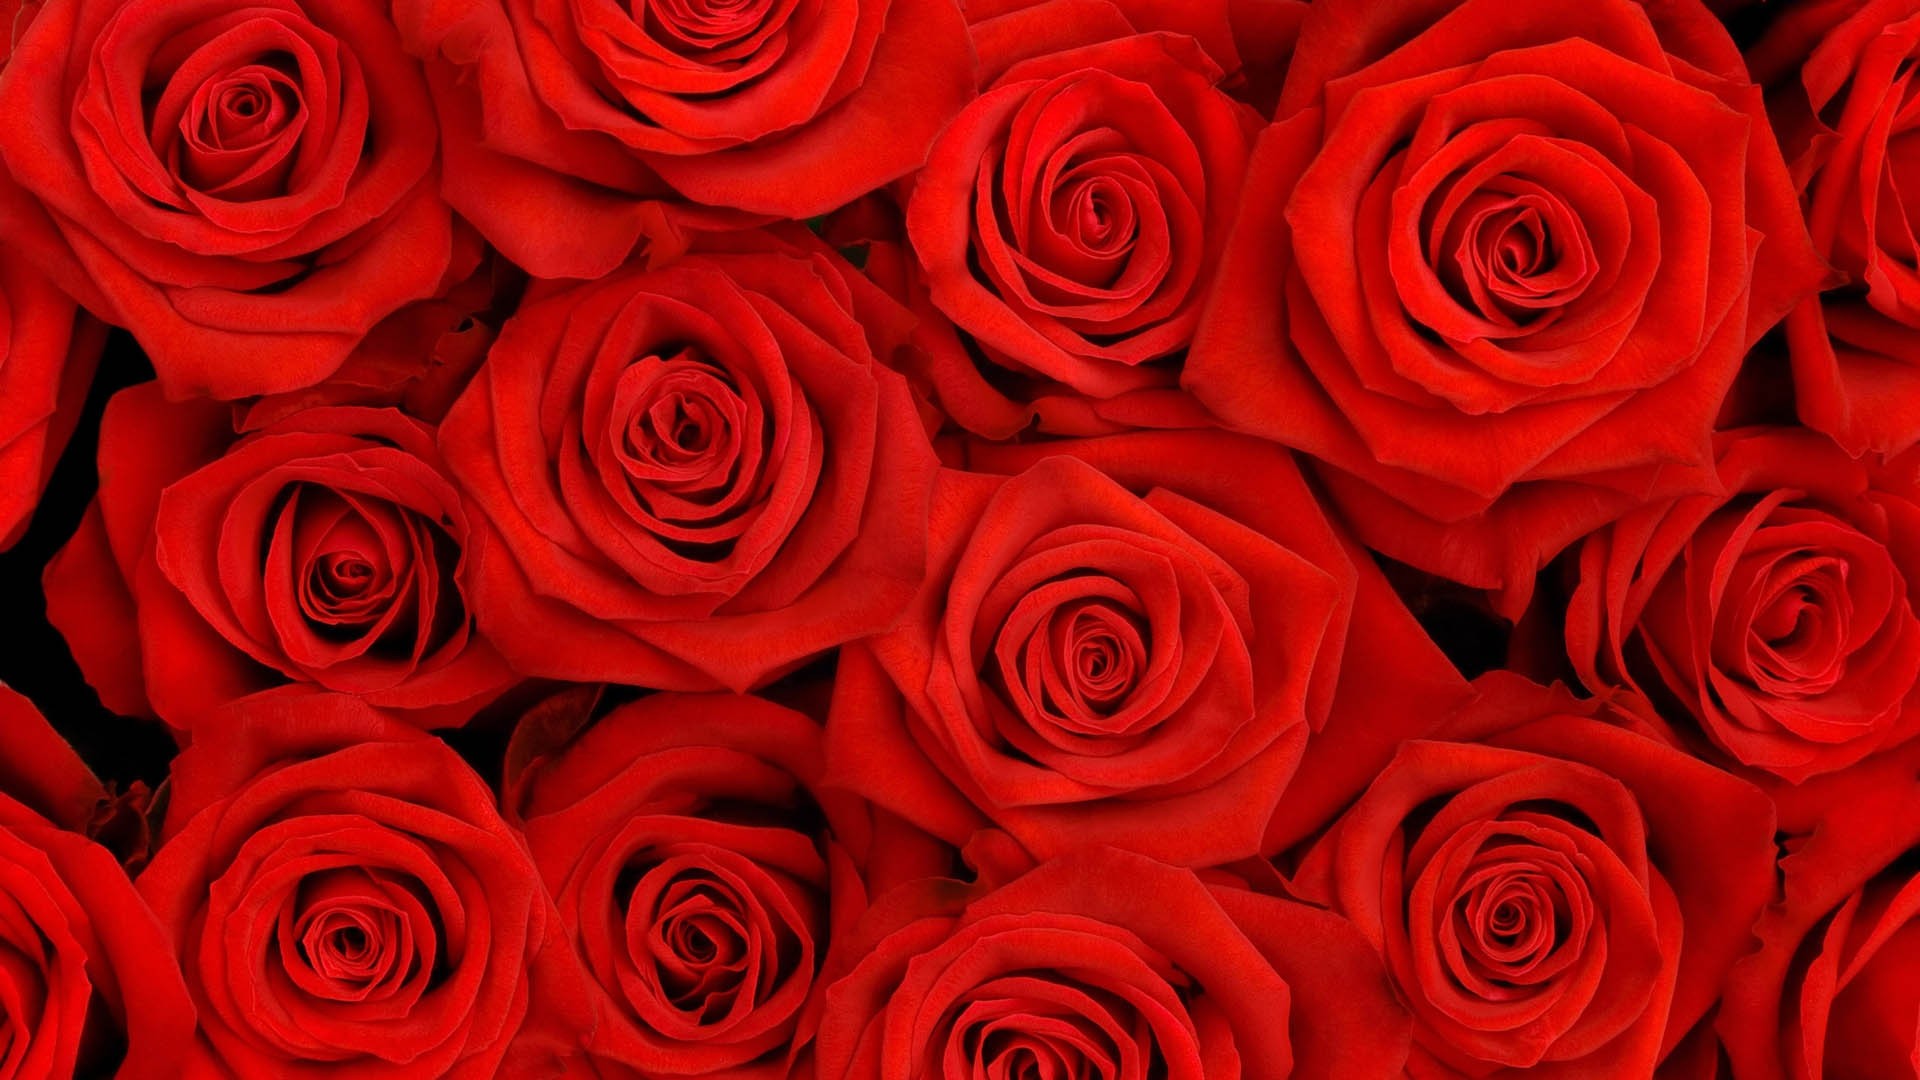 General 1920x1080 rose flowers red flowers plants